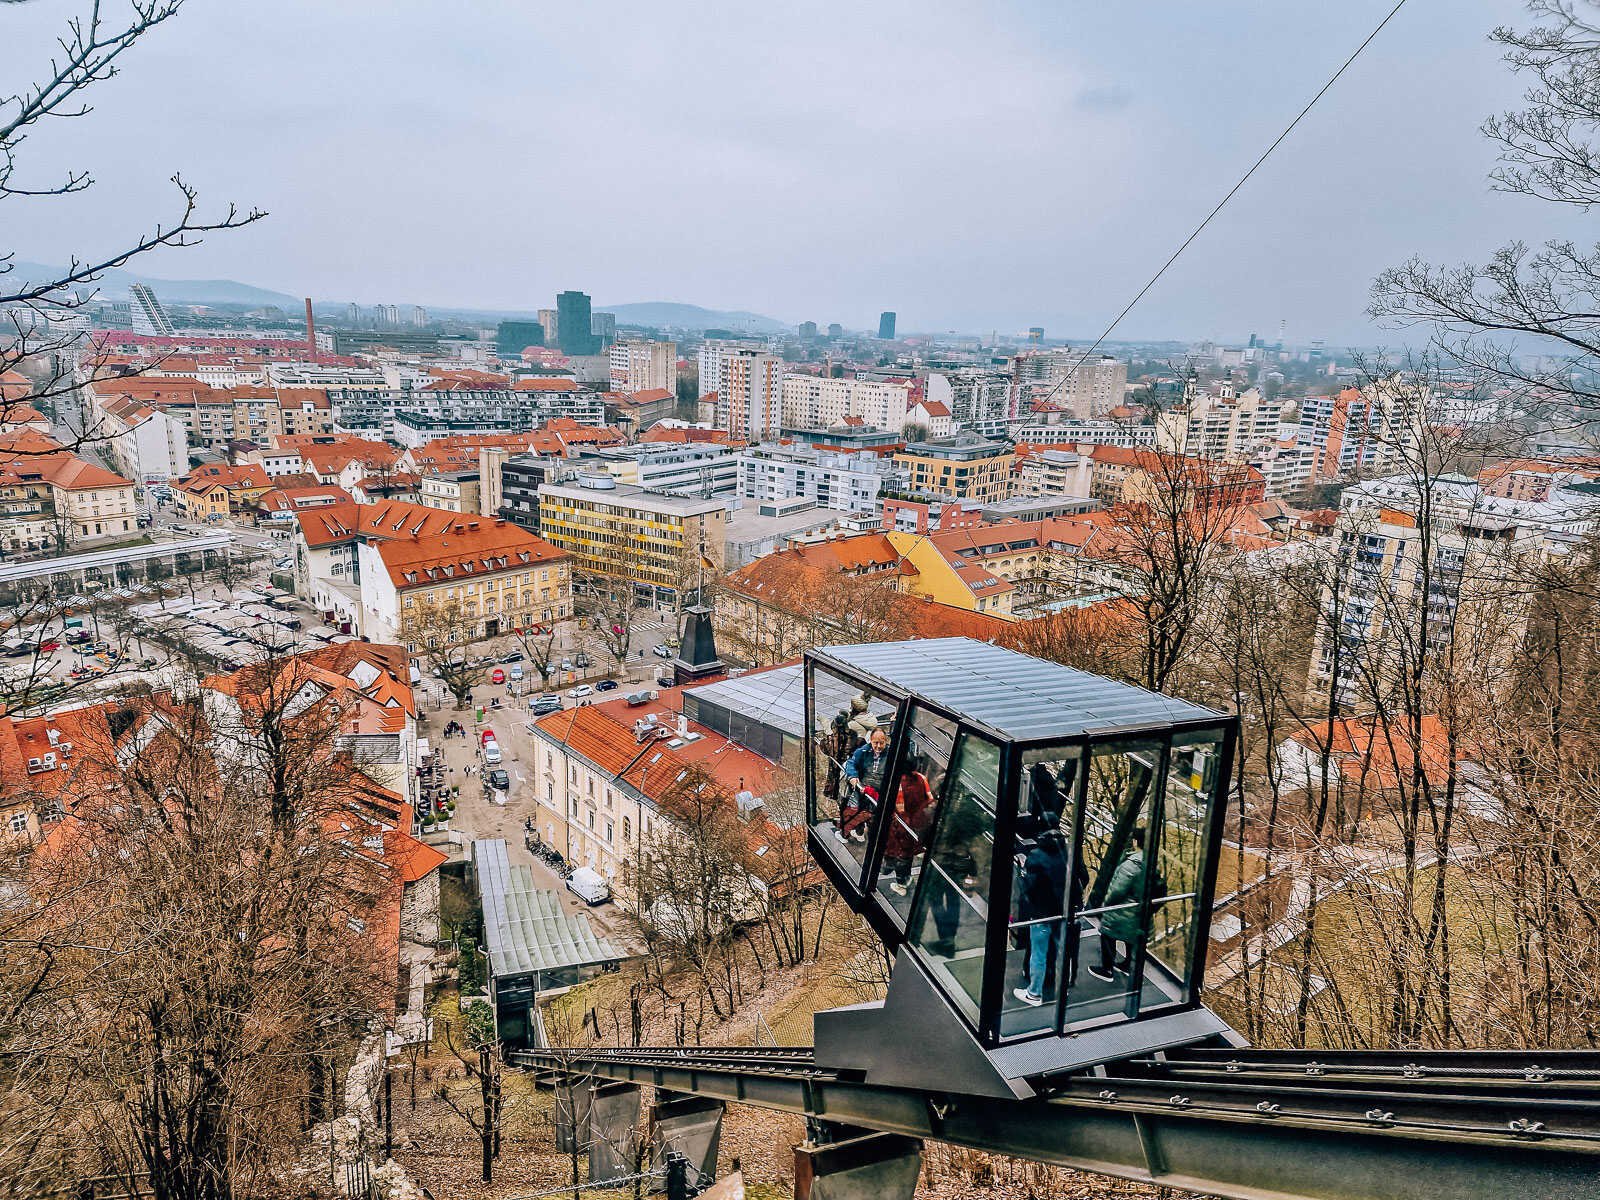 a glass funicular rising up the side of a hill with view of the city below